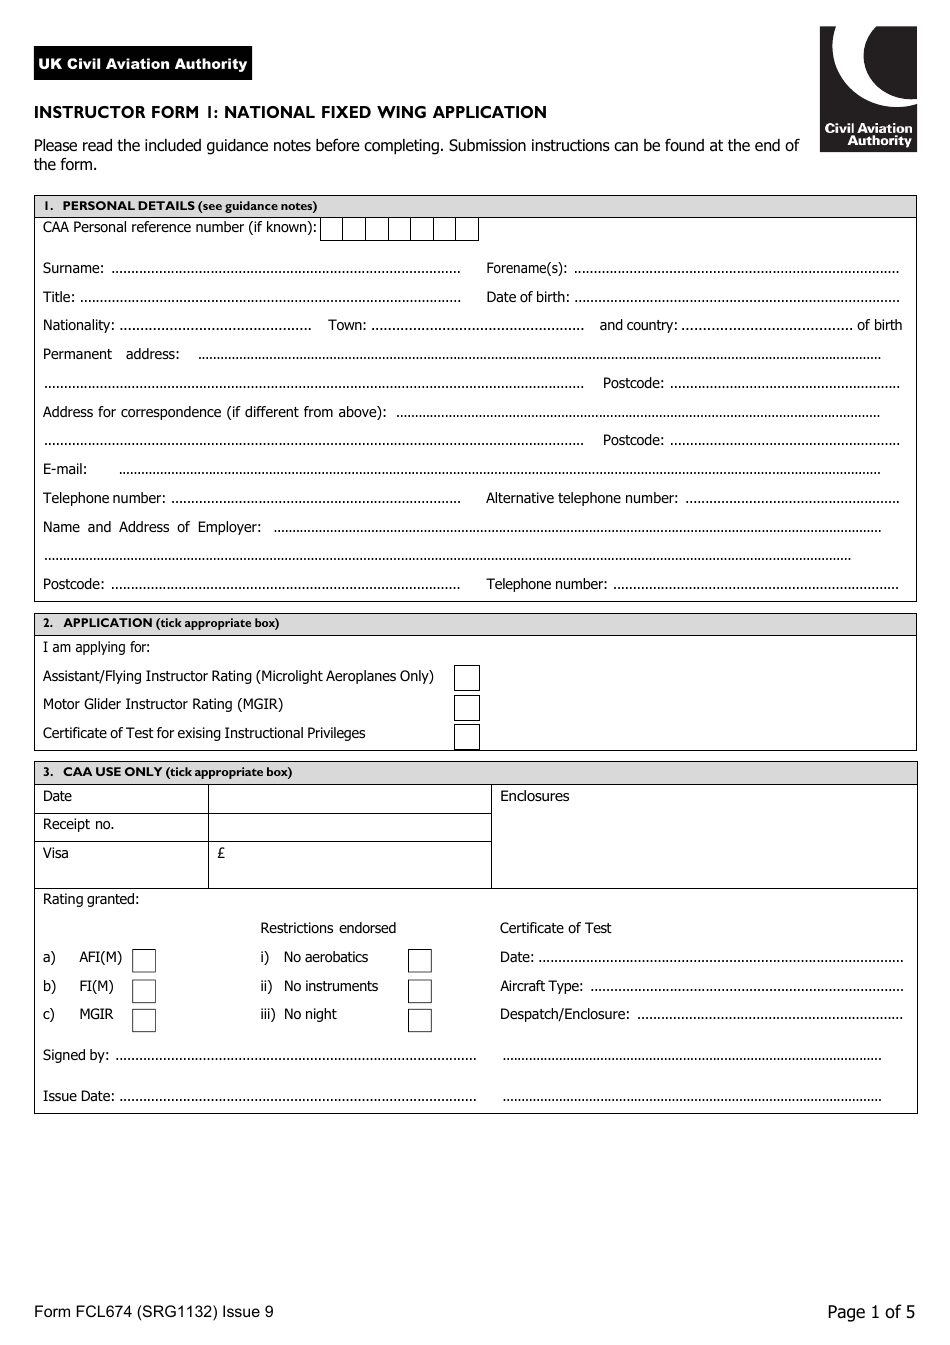 Instructor Form I (SRG1132; FCL674) National Fixed Wing Application - United Kingdom, Page 1